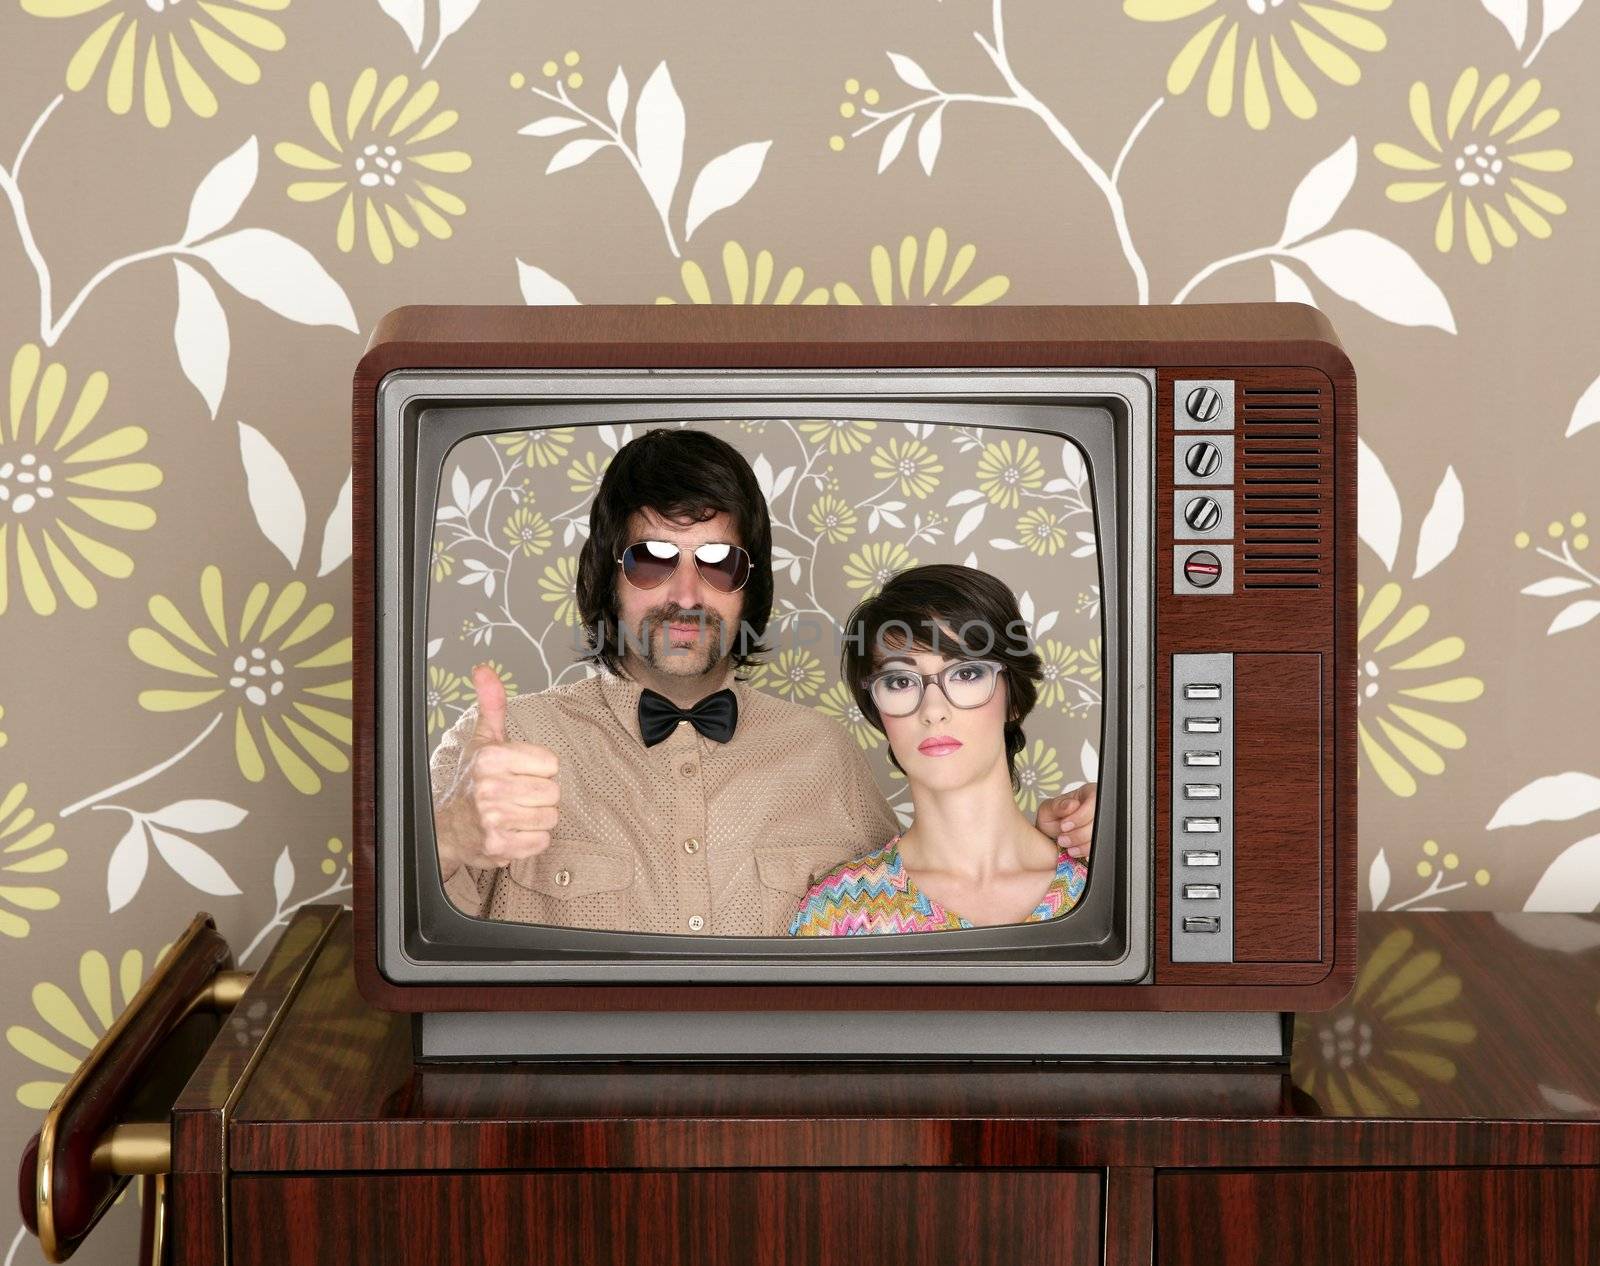 old wooden tv with nerd silly couple retro in screen on wallpaper background